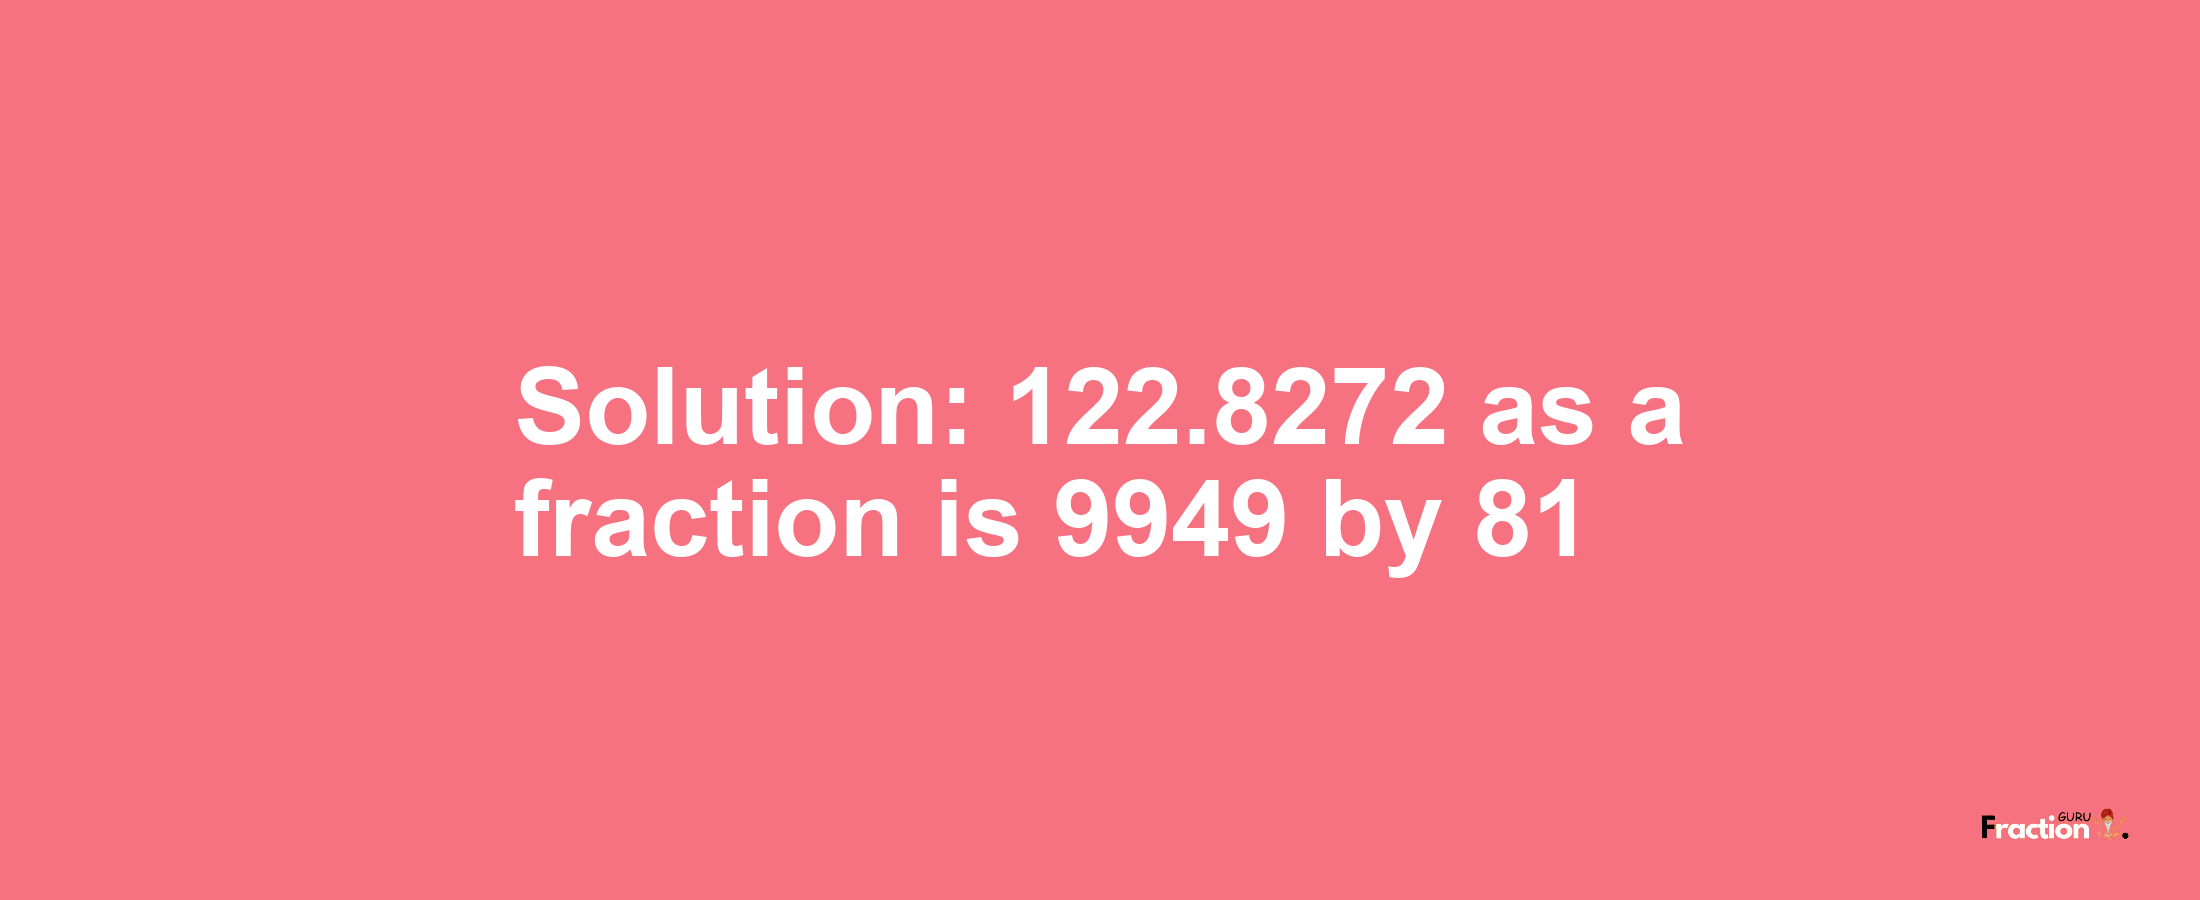 Solution:122.8272 as a fraction is 9949/81